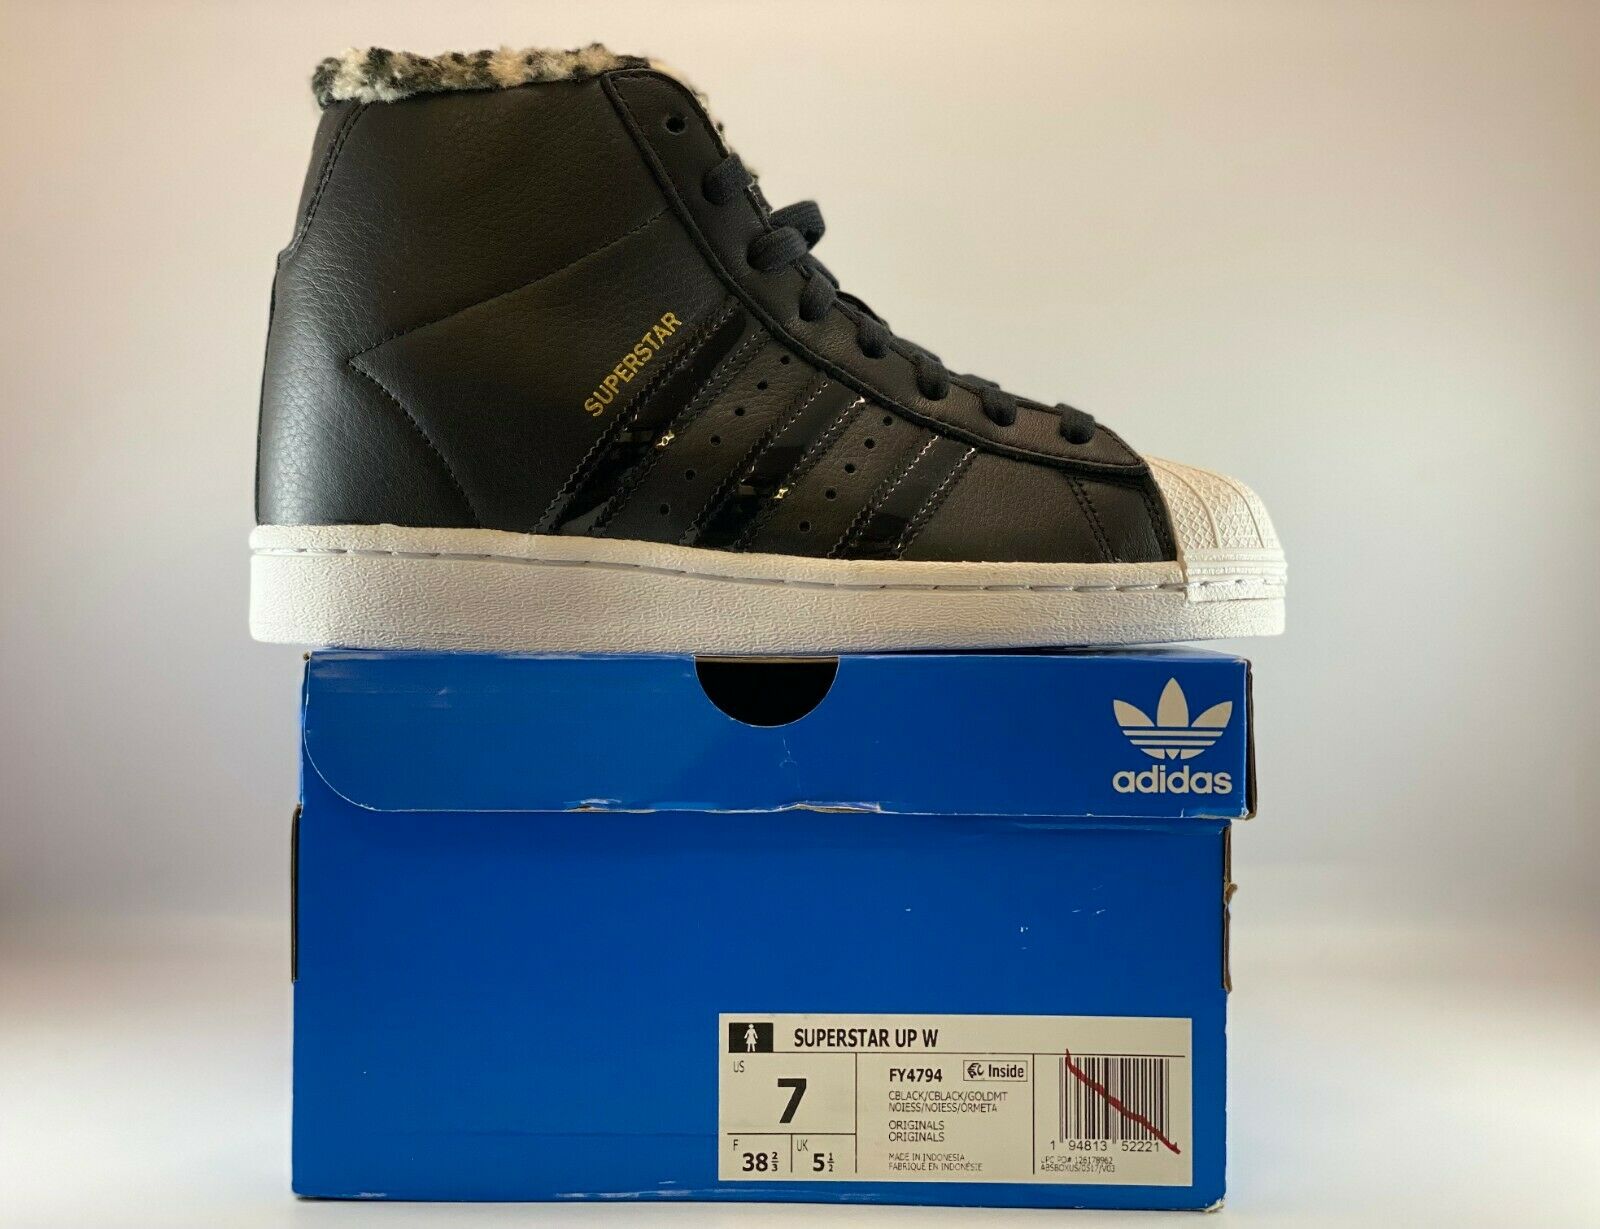 Adidas Originals Superstar Up Womens Wedged Shoes Size 7 Core Black Gold FY4794